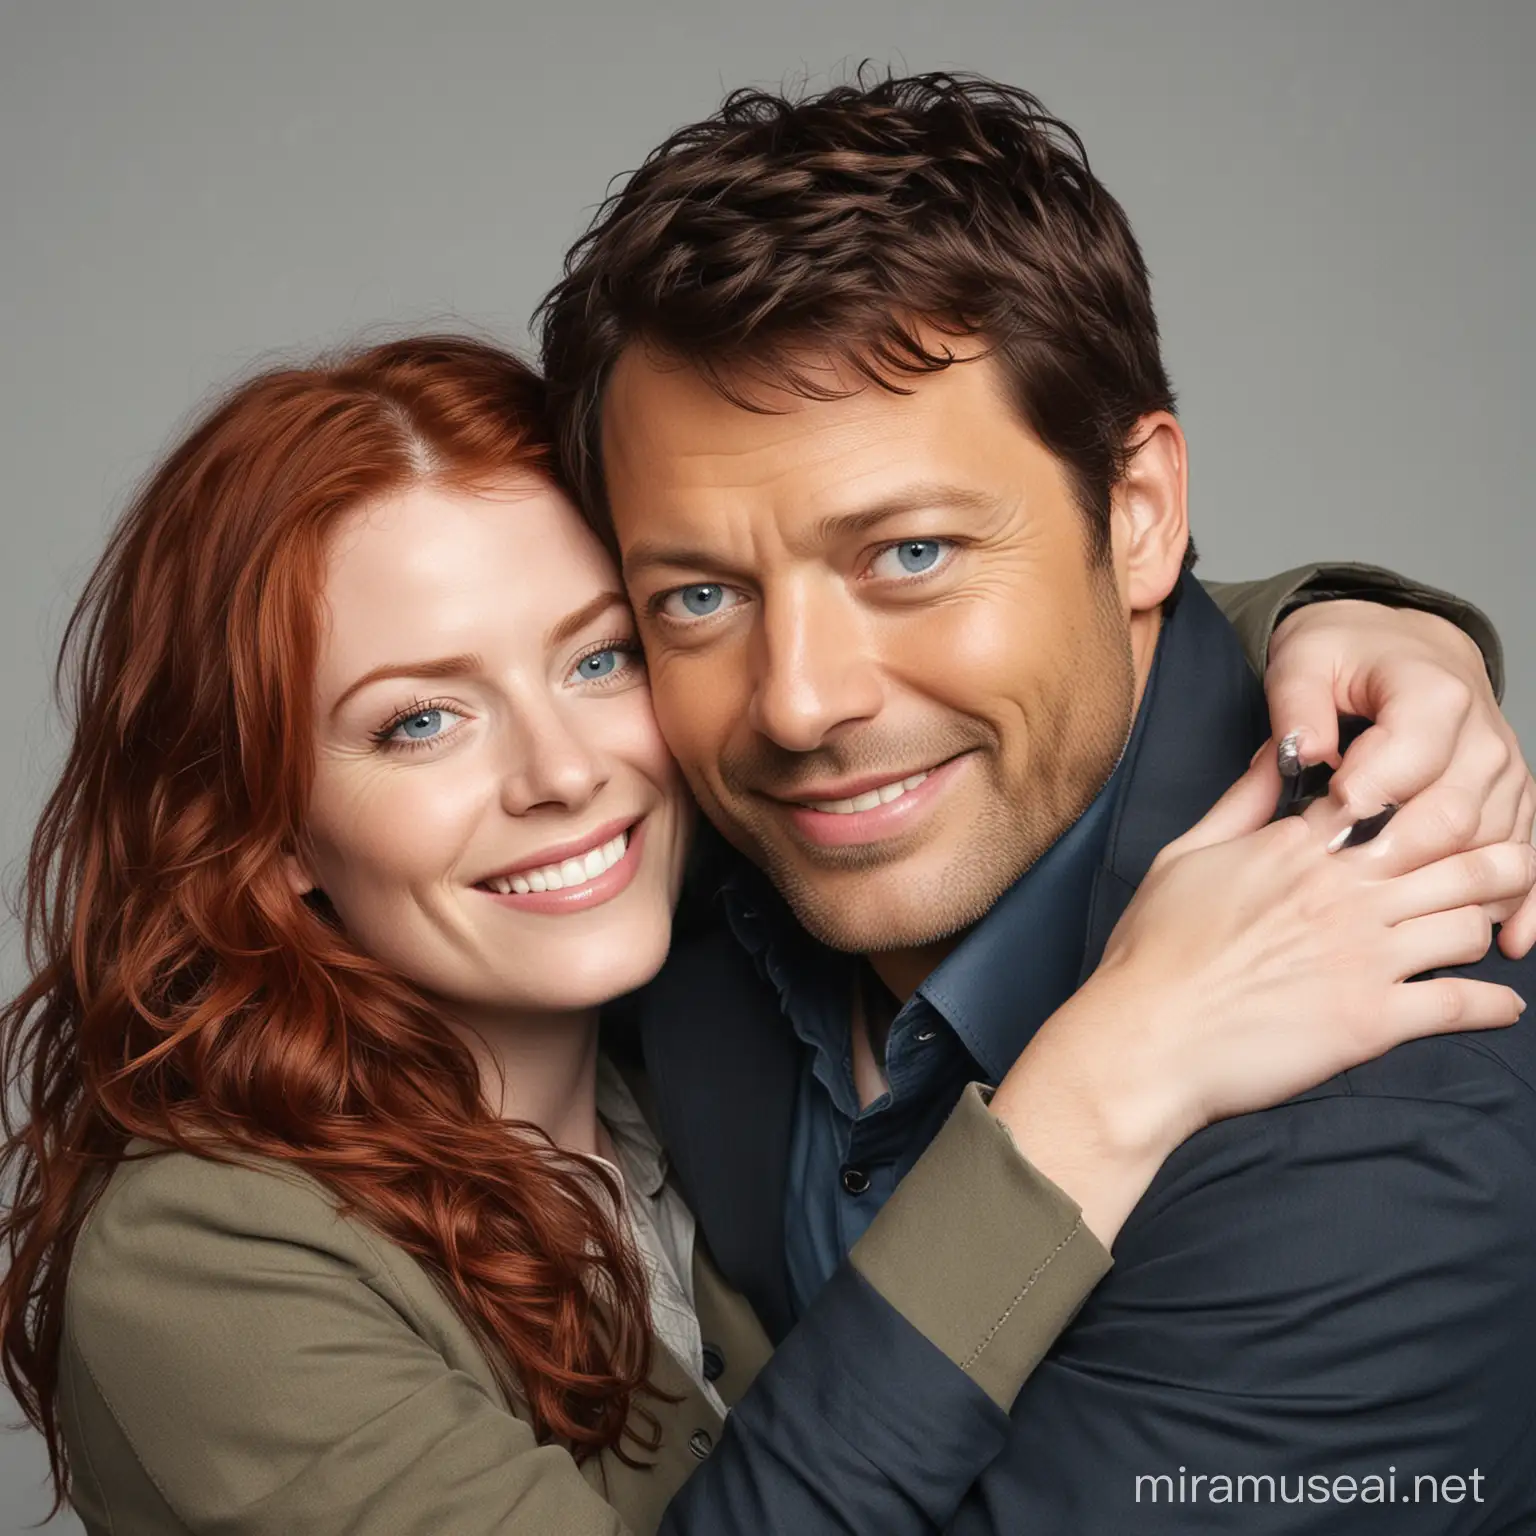 Actor Misha Collins with blue eyes hugs a young woman with wavy red hair. They look happy.